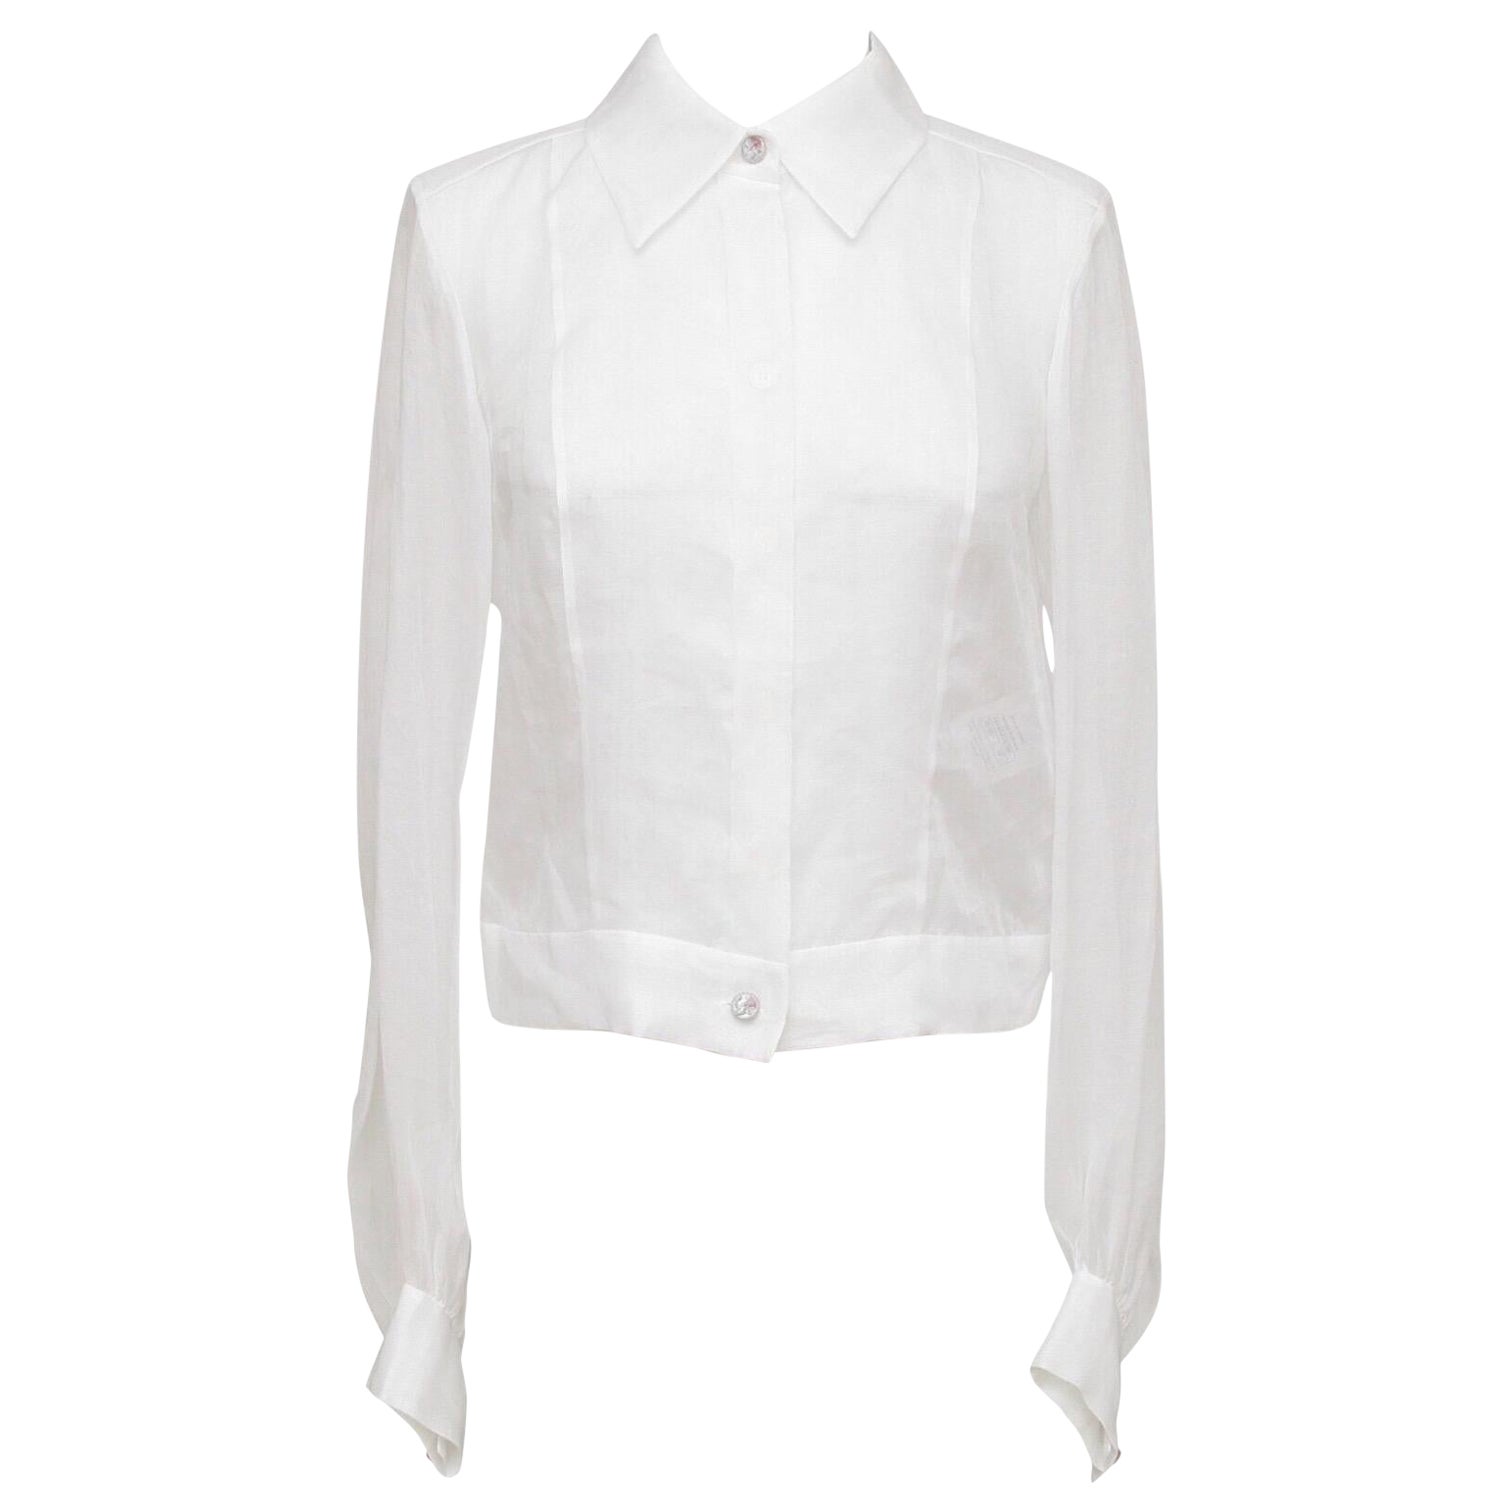 CHANEL White Blouse Top Long Sleeve Cotton 2017 17C $1800 NWT